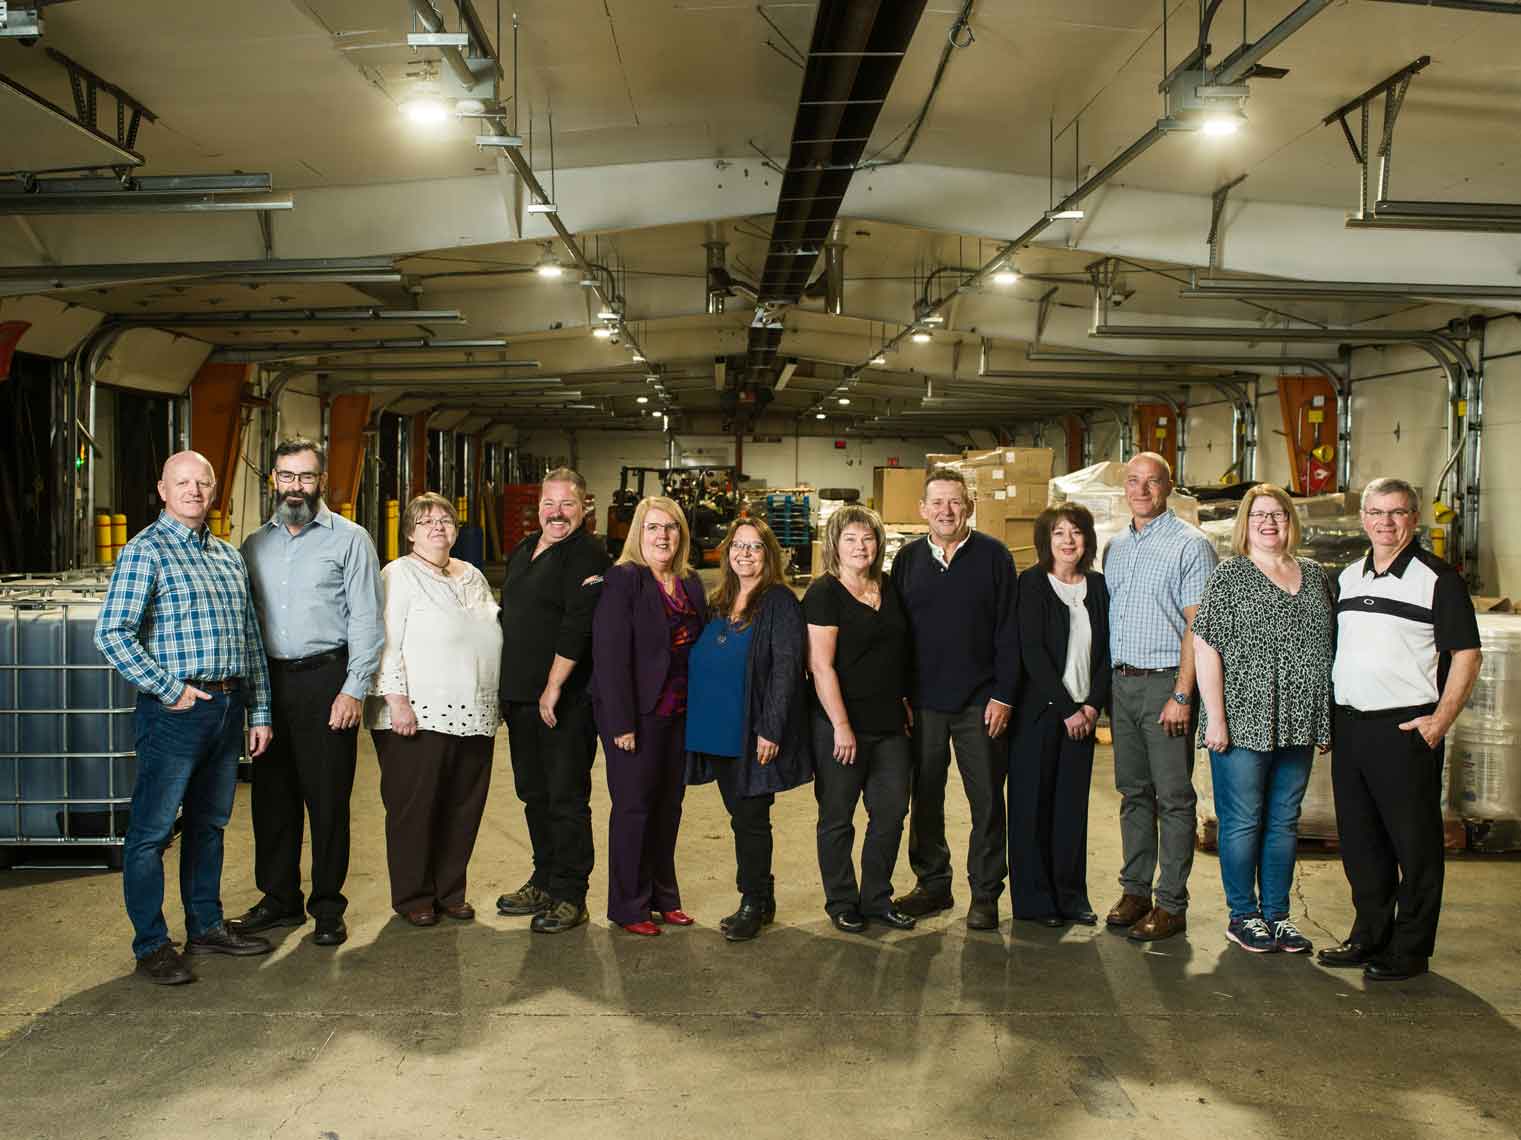 Newfoundland Team - people working from past 30 years